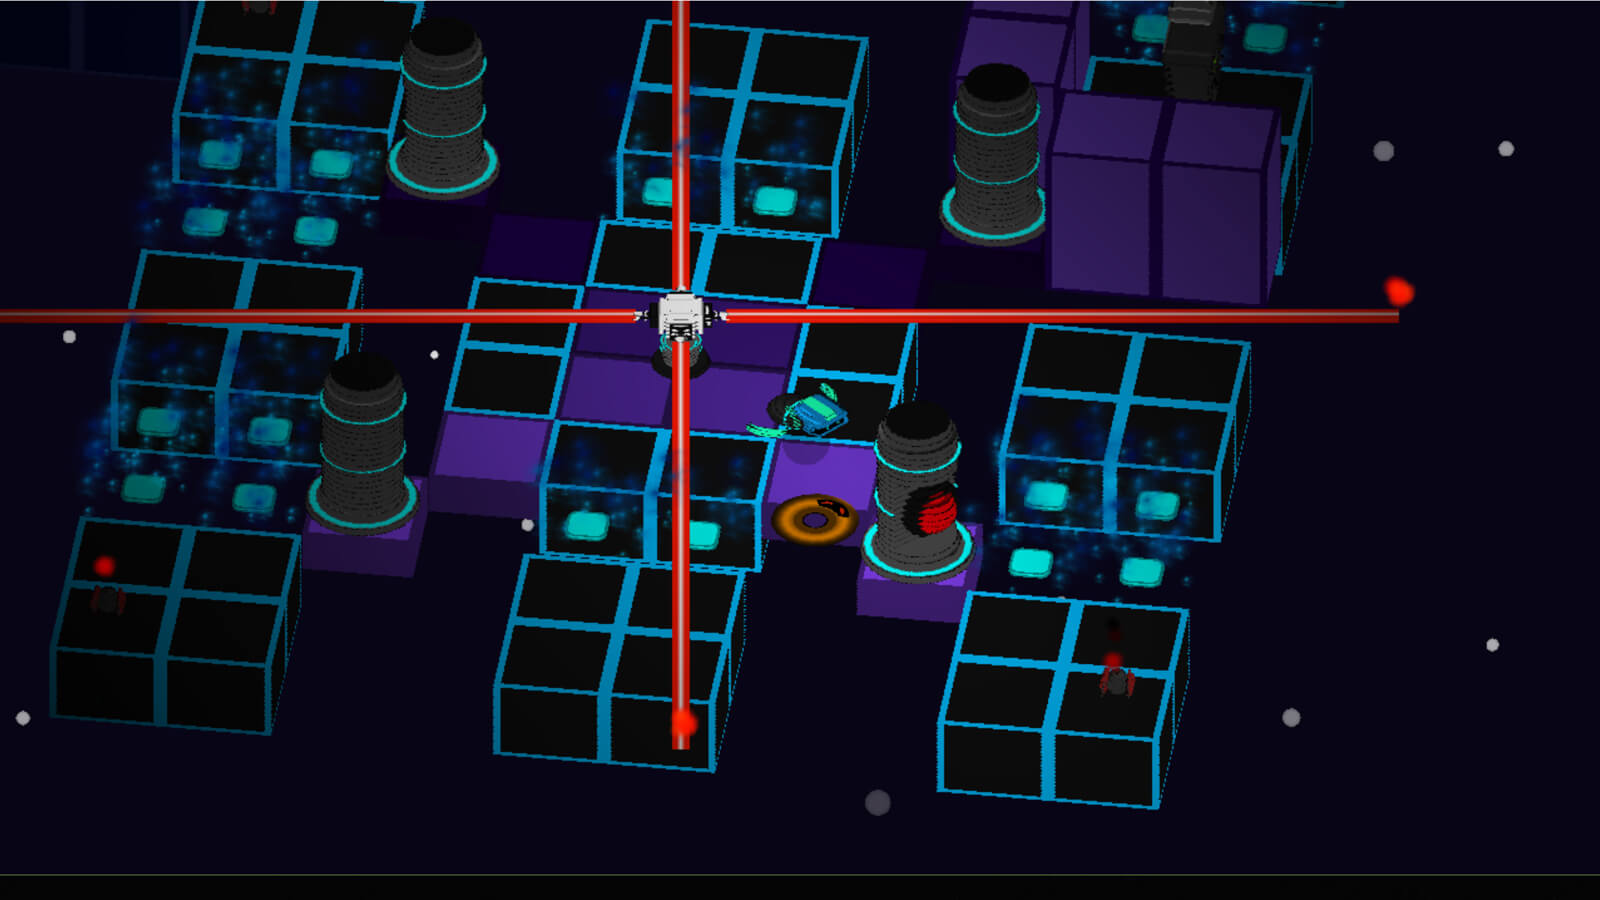 A laser turret shoots beams in four directions at once in a grid-like cybernetic world.